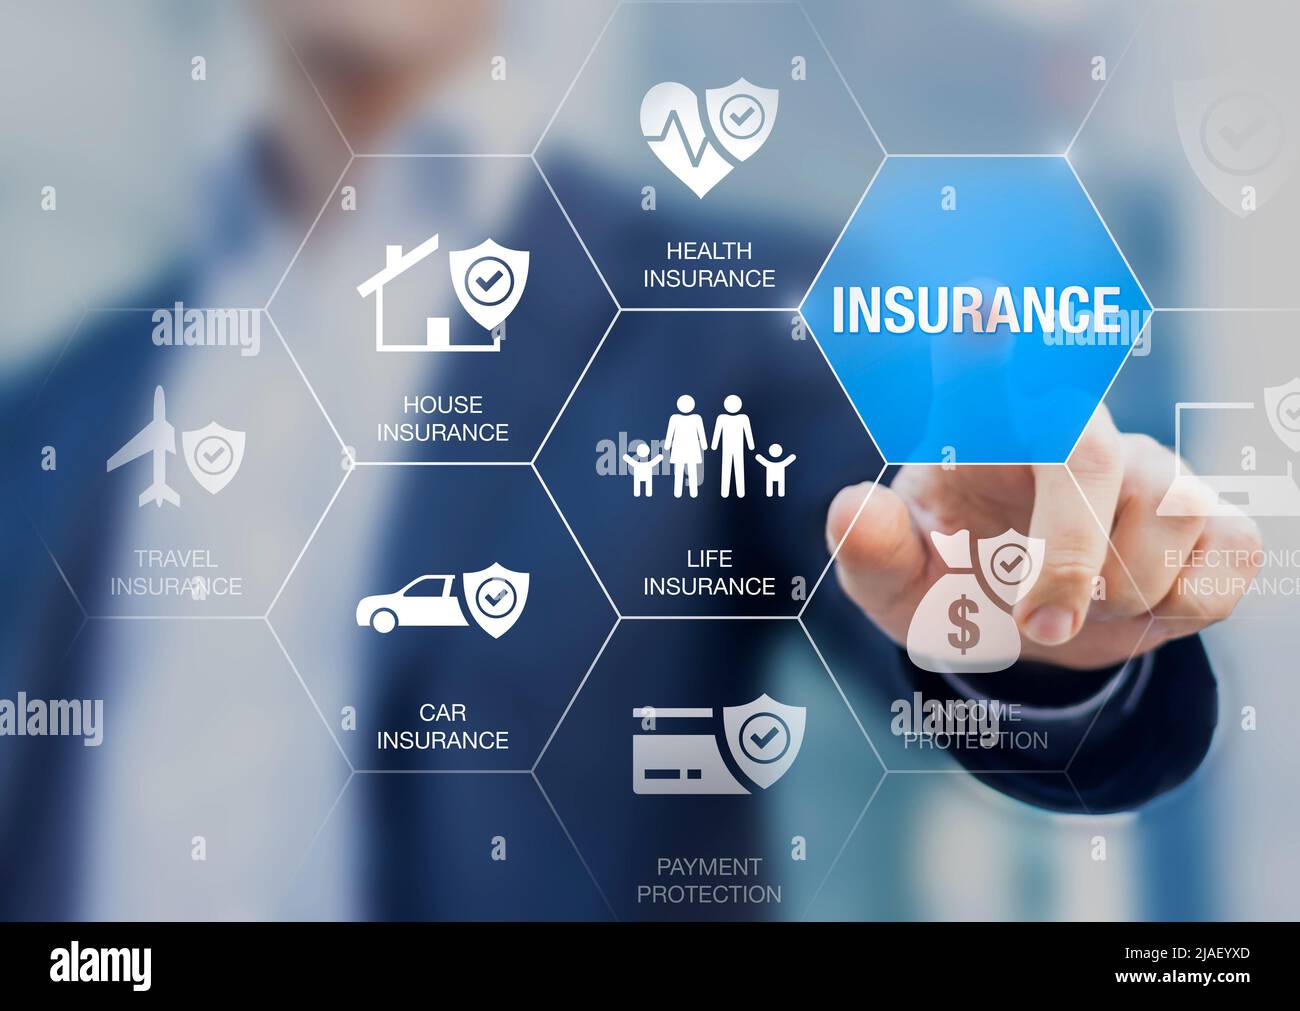 Insurance covering life, health, home, car, travel concept. Good coverage against risks and dangers. Concept with person touching icons. Stock Photo